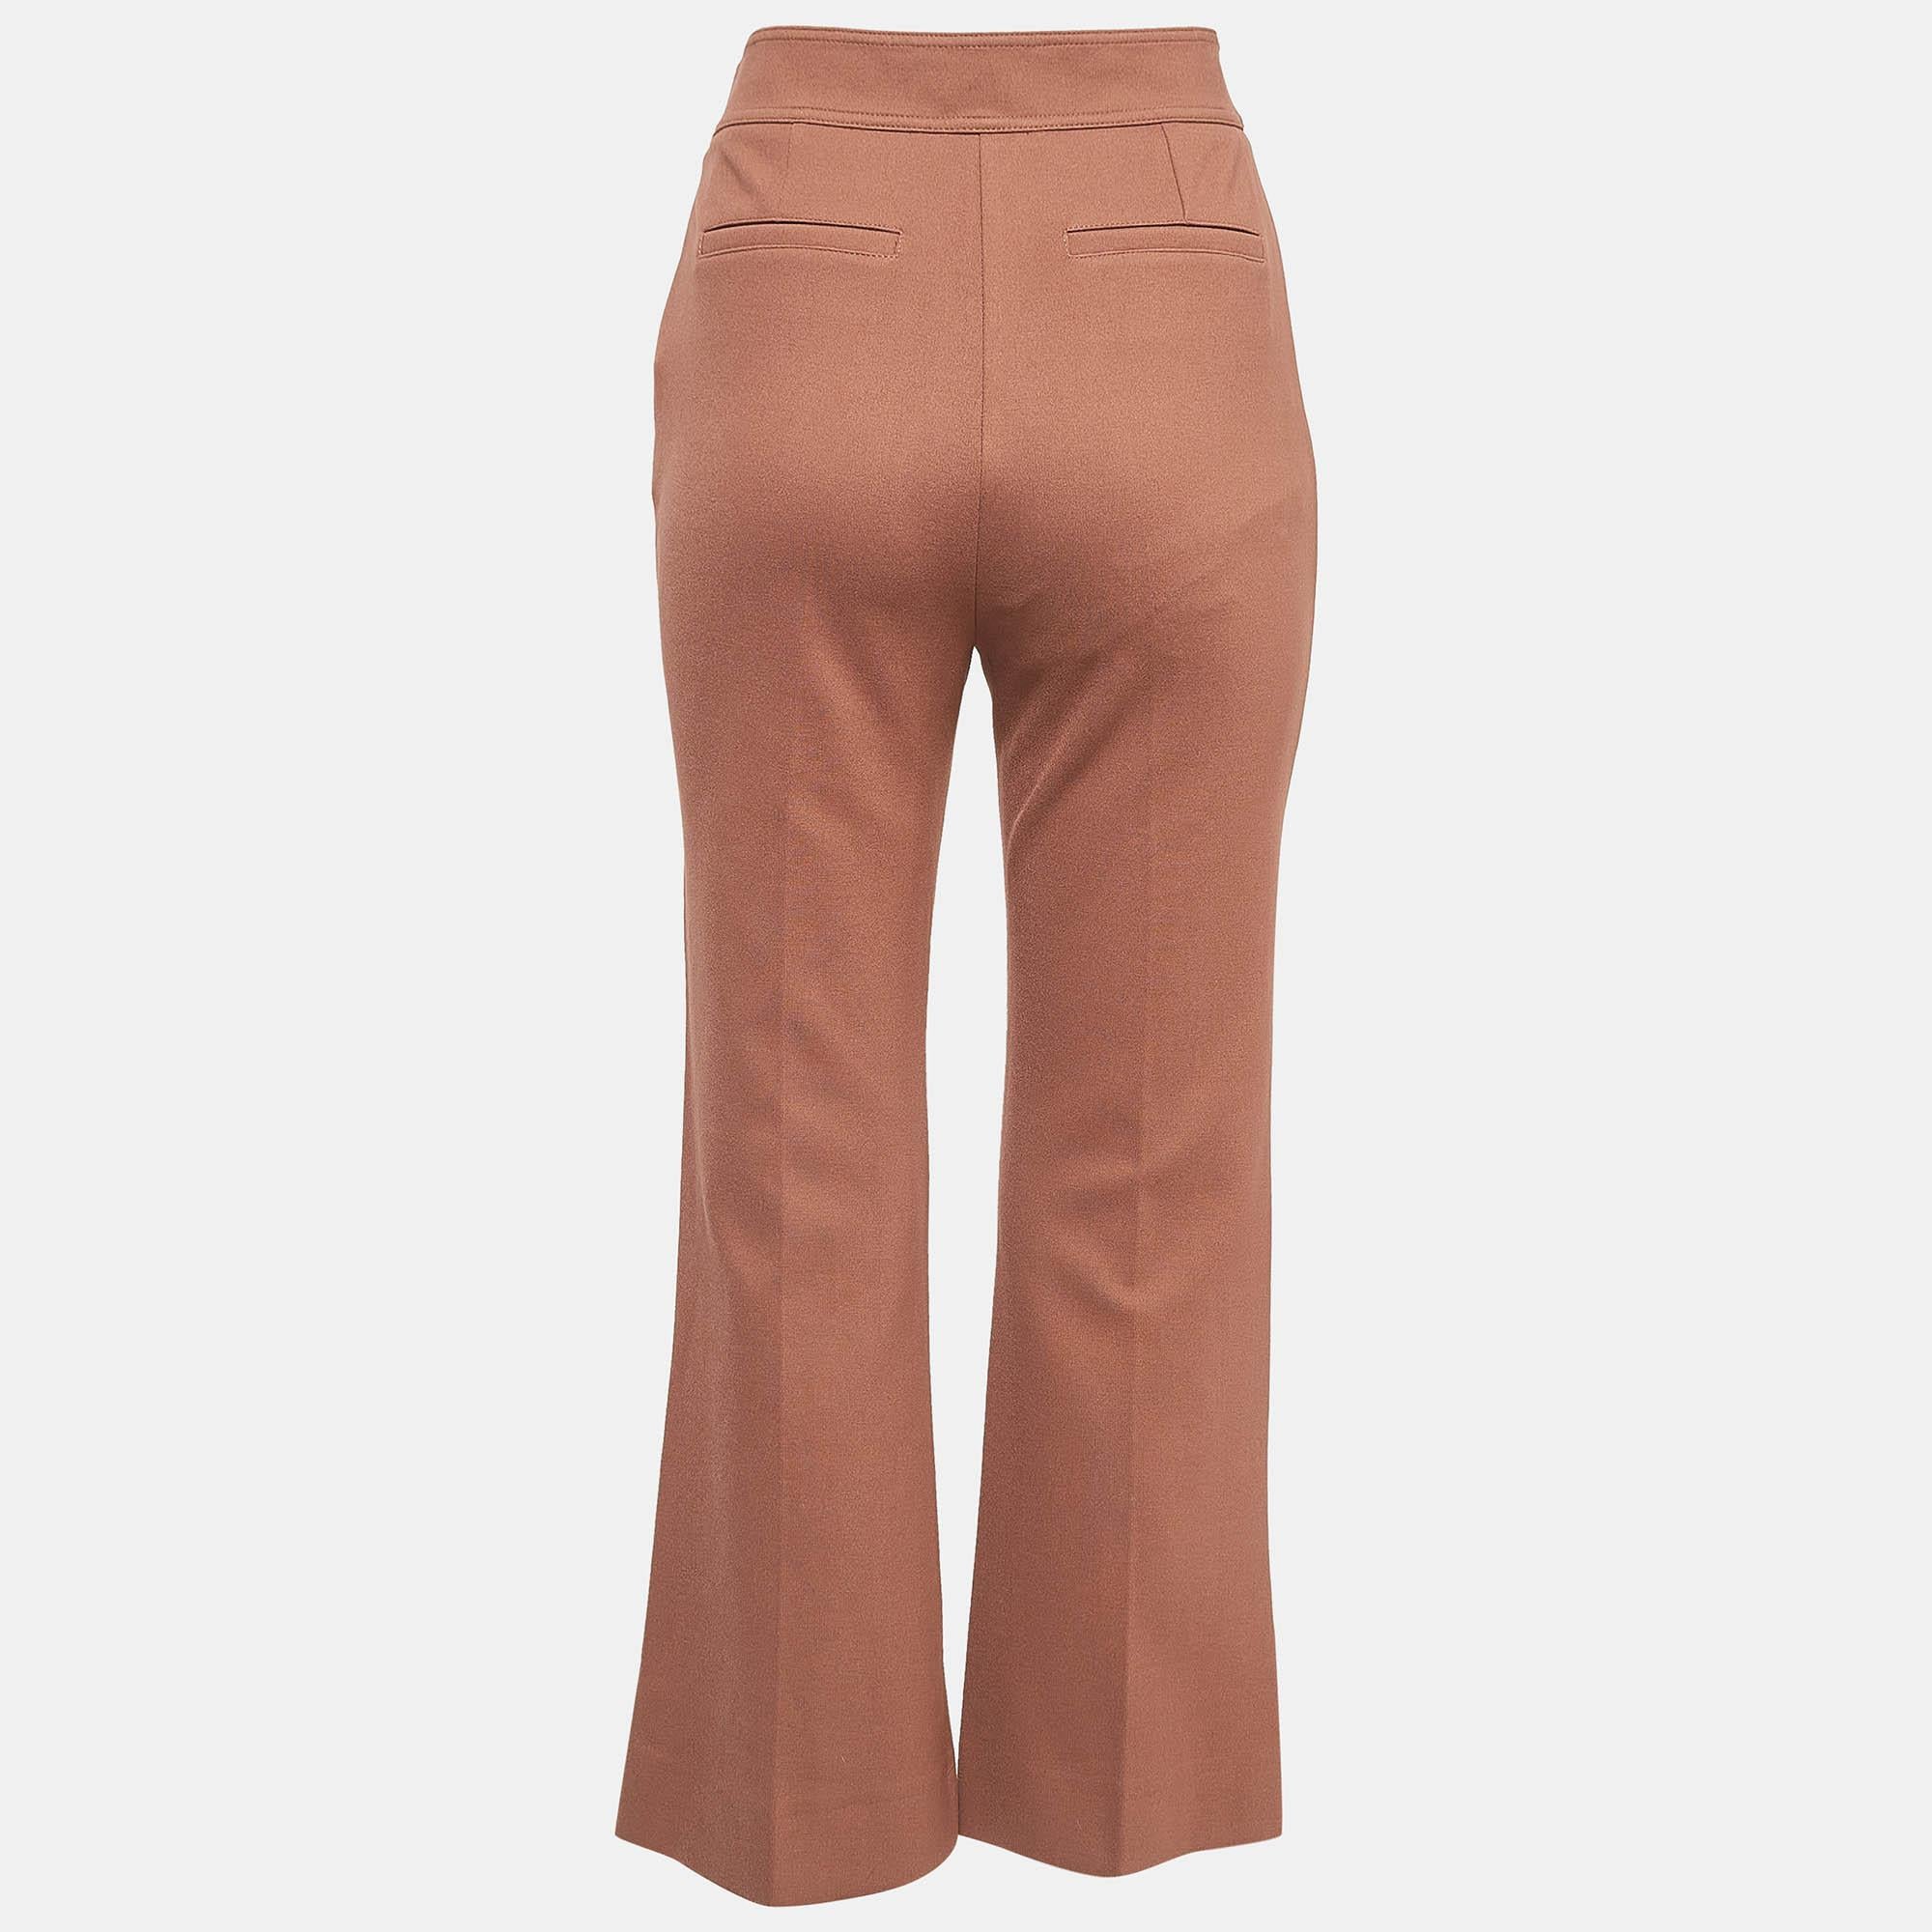 Crafted by Victoria Victoria Beckham, these brown stretch knit flared trousers epitomize contemporary chic. With a sleek silhouette and a flattering fit, they effortlessly blend style and comfort. Perfect for both casual outings and formal